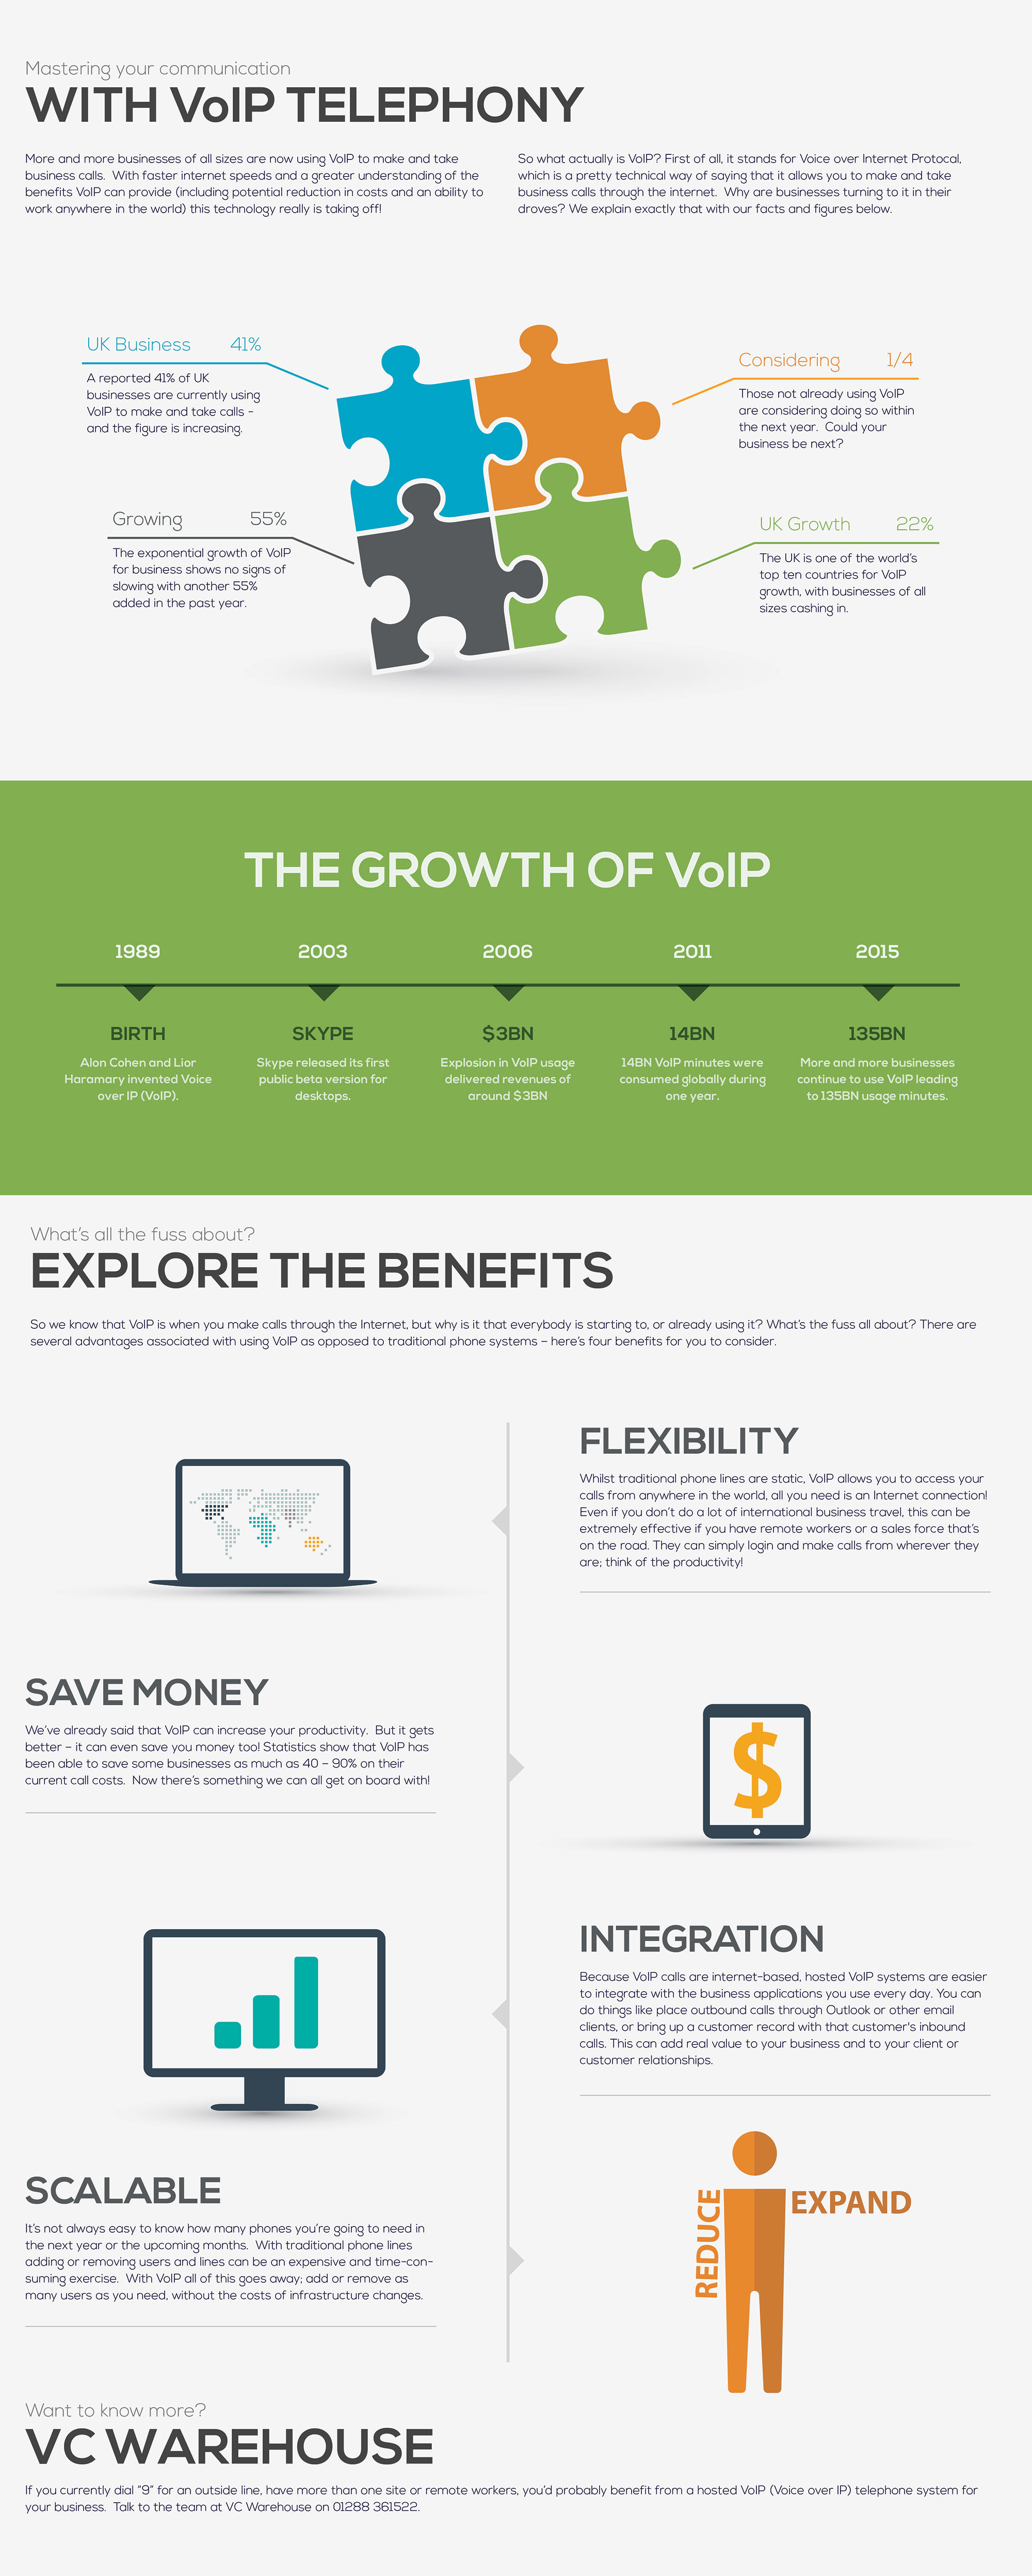 What are the benefits of VoIP?